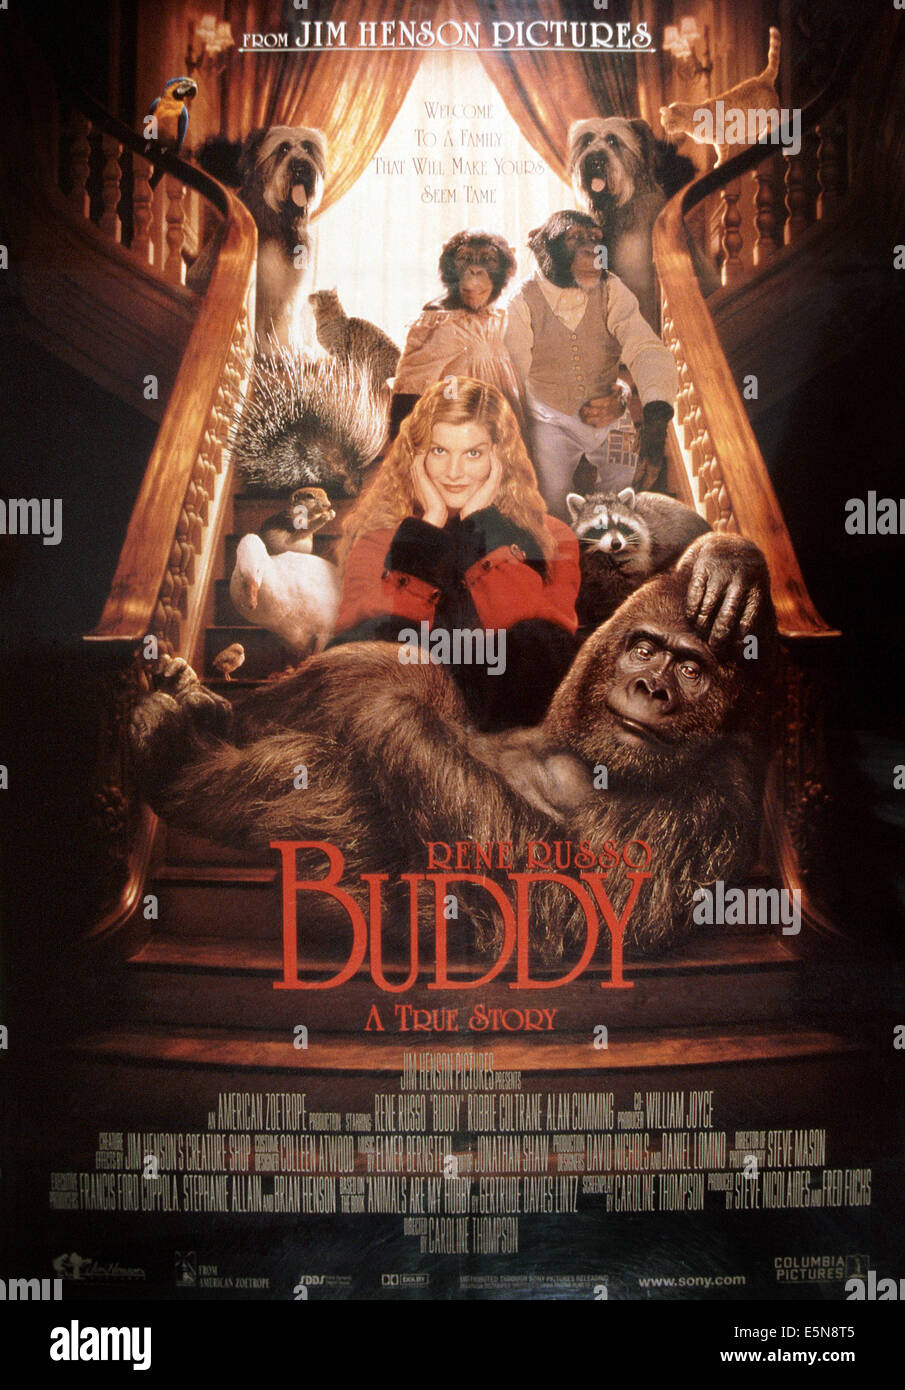 BUDDY, Rene Russo, 1997, © Columbia/courtesy Everett Collection Stock Photo